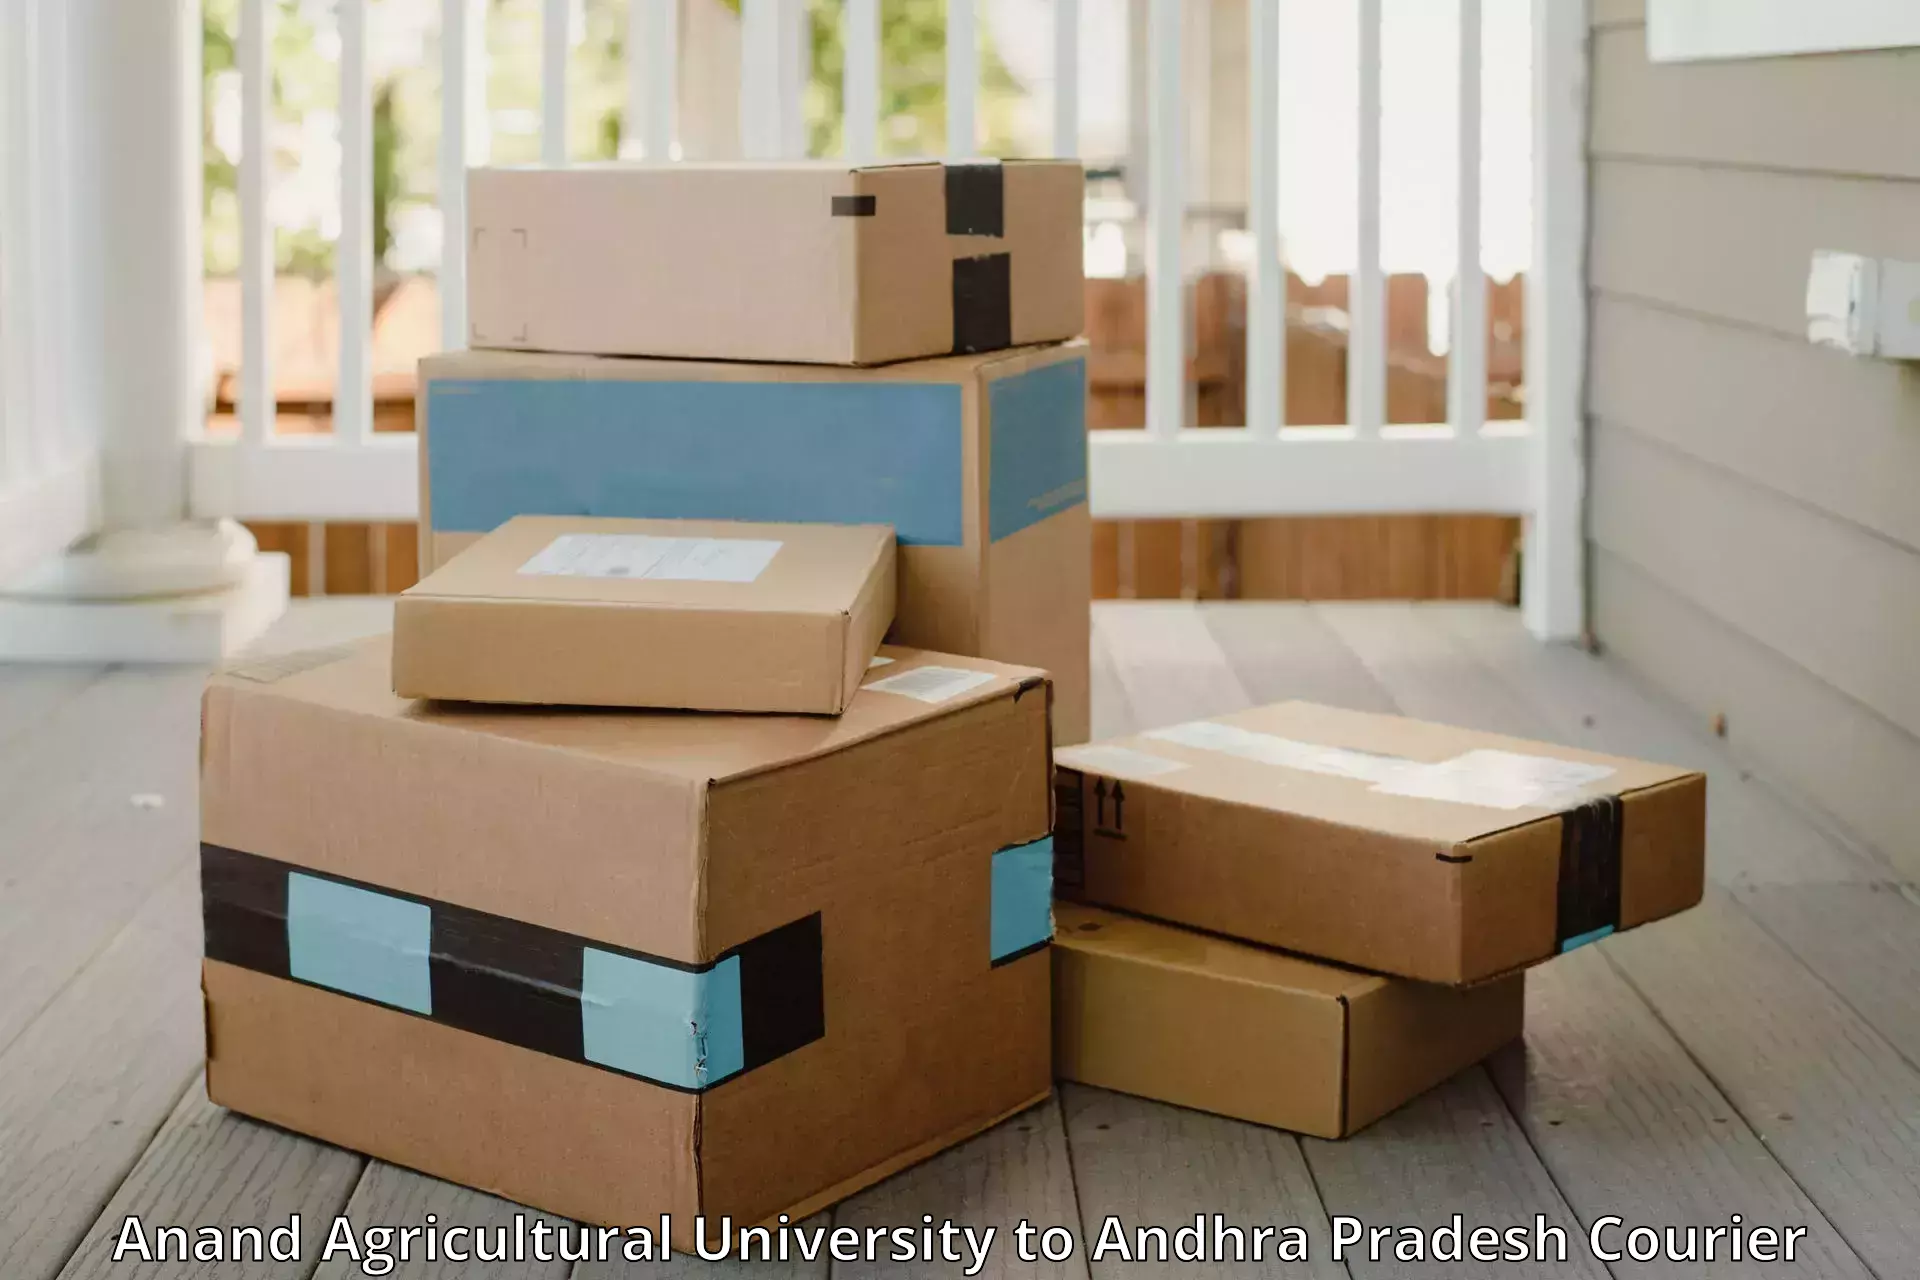 Luggage transport service Anand Agricultural University to Rayachoti